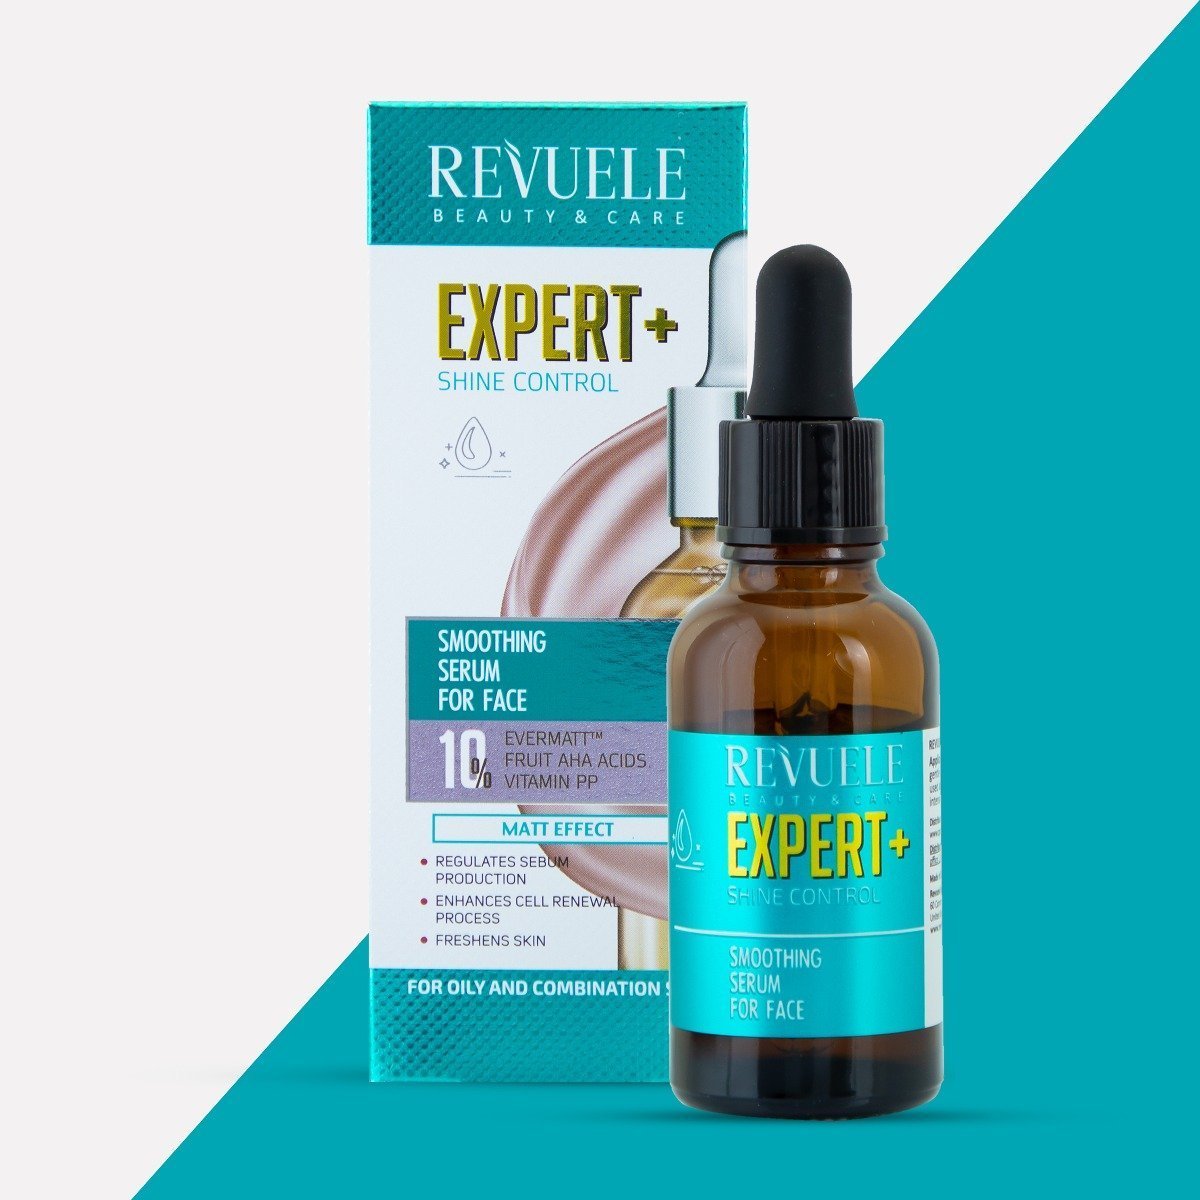 Revuele Expert+ Shine Control Smoothing Serum For Face With Matt Effect 